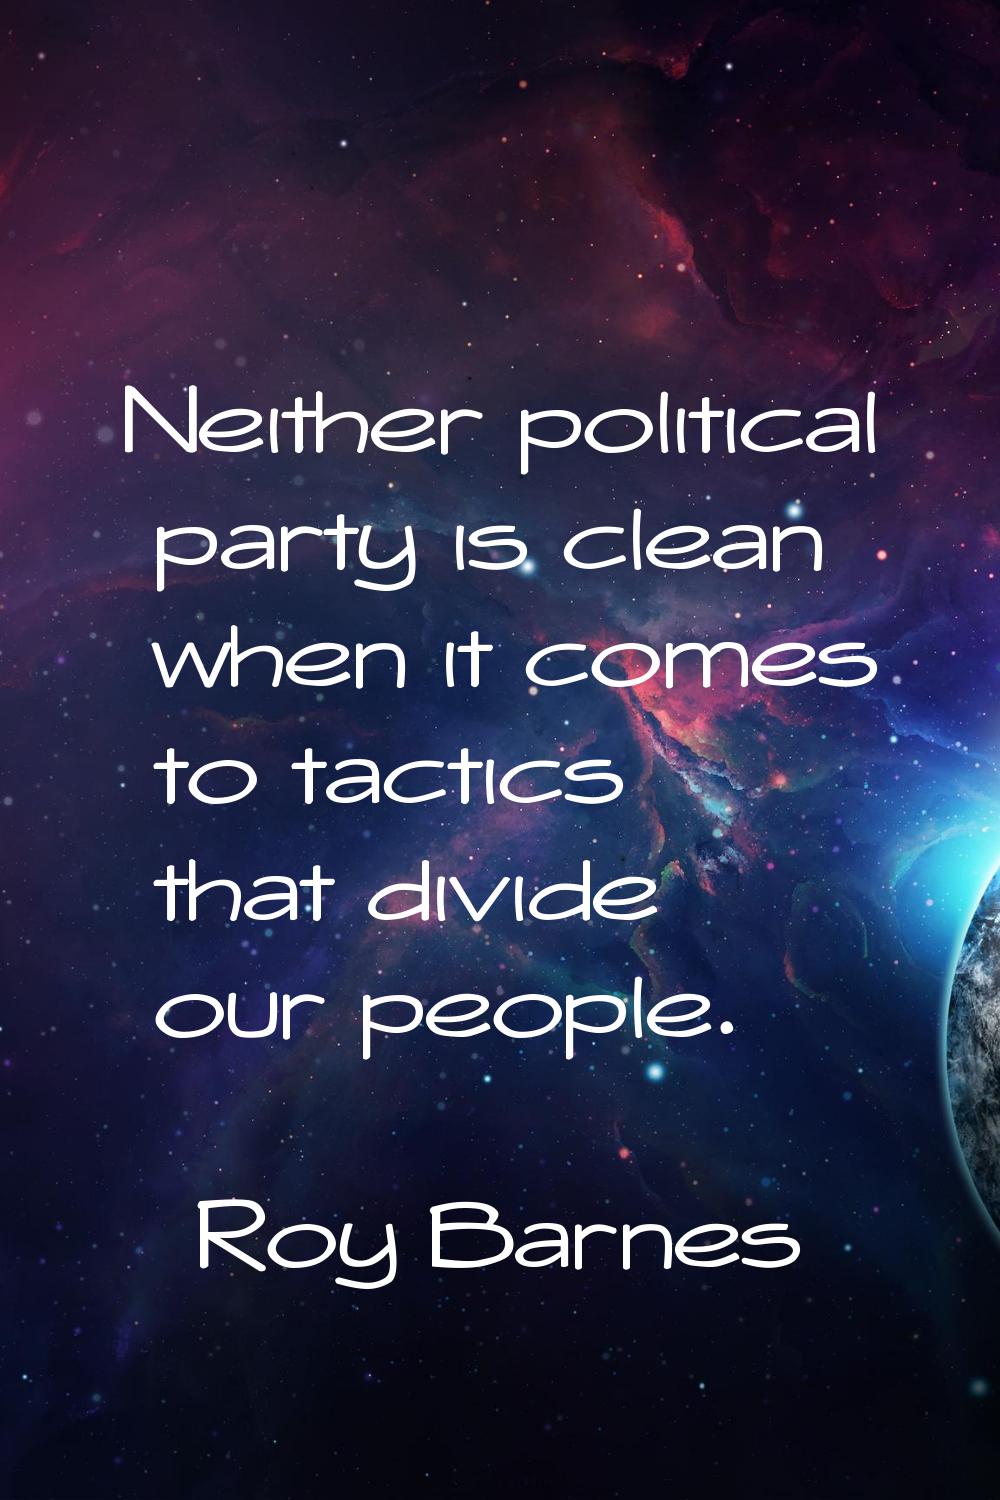 Neither political party is clean when it comes to tactics that divide our people.